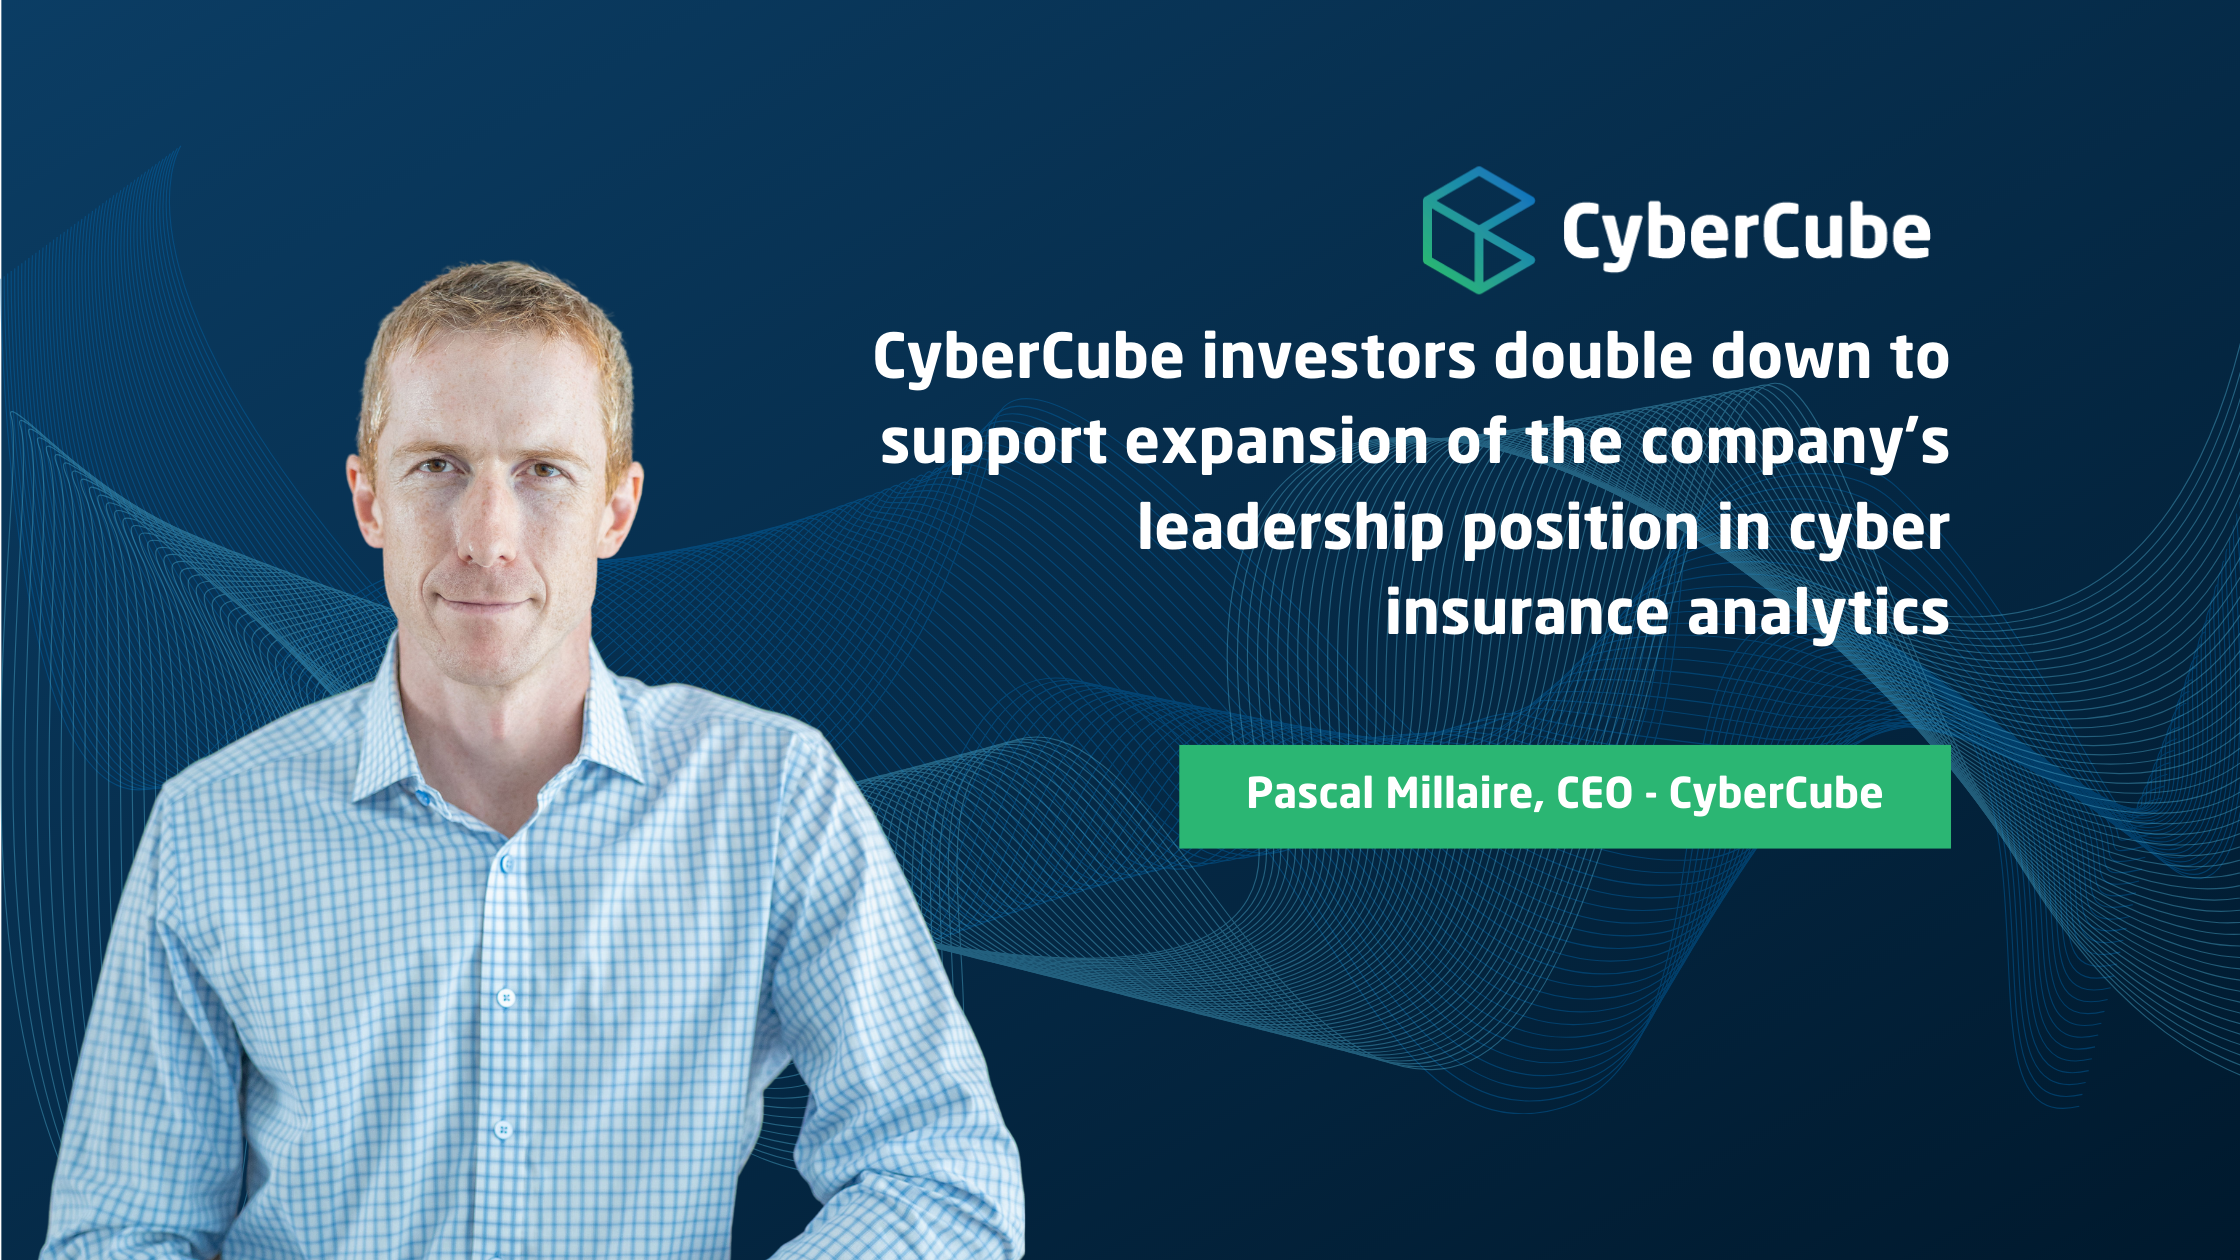 CyberCube investors double down to support expansion of the company’s leadership position in cyber insurance analytics